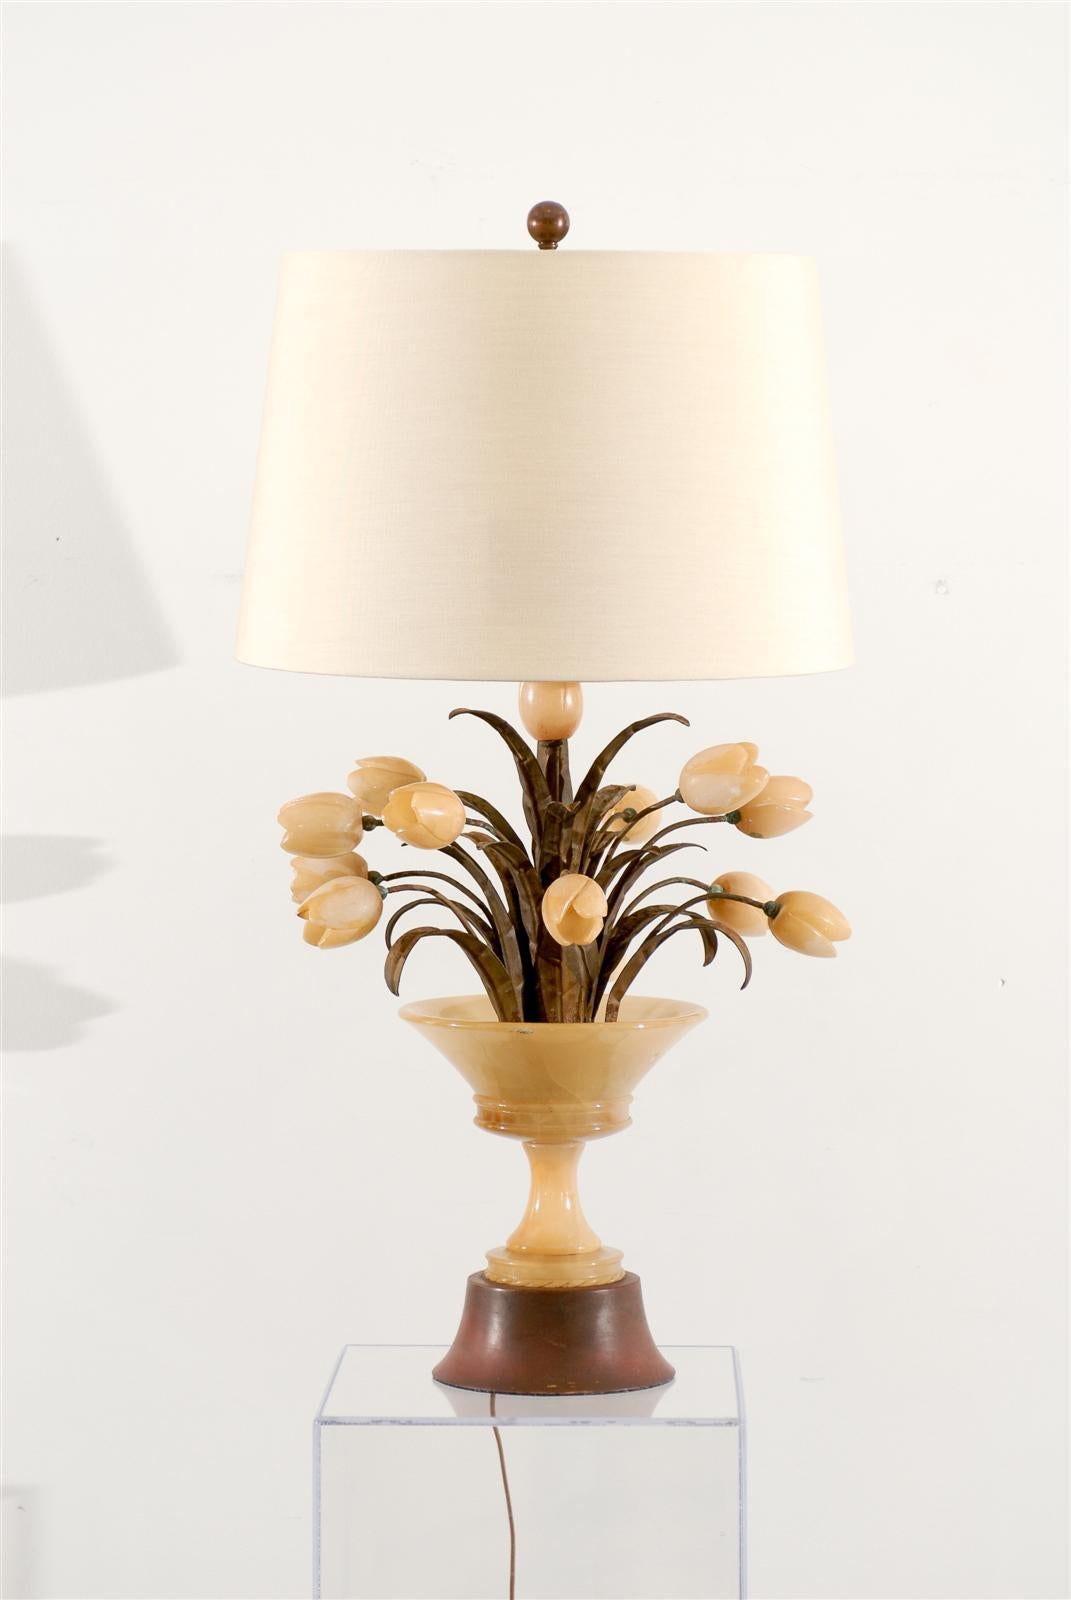 Unusual tole, alabaster tulip lamp on wooden painted base with new cream linen shade and rewired.

Dimensions: Height 34